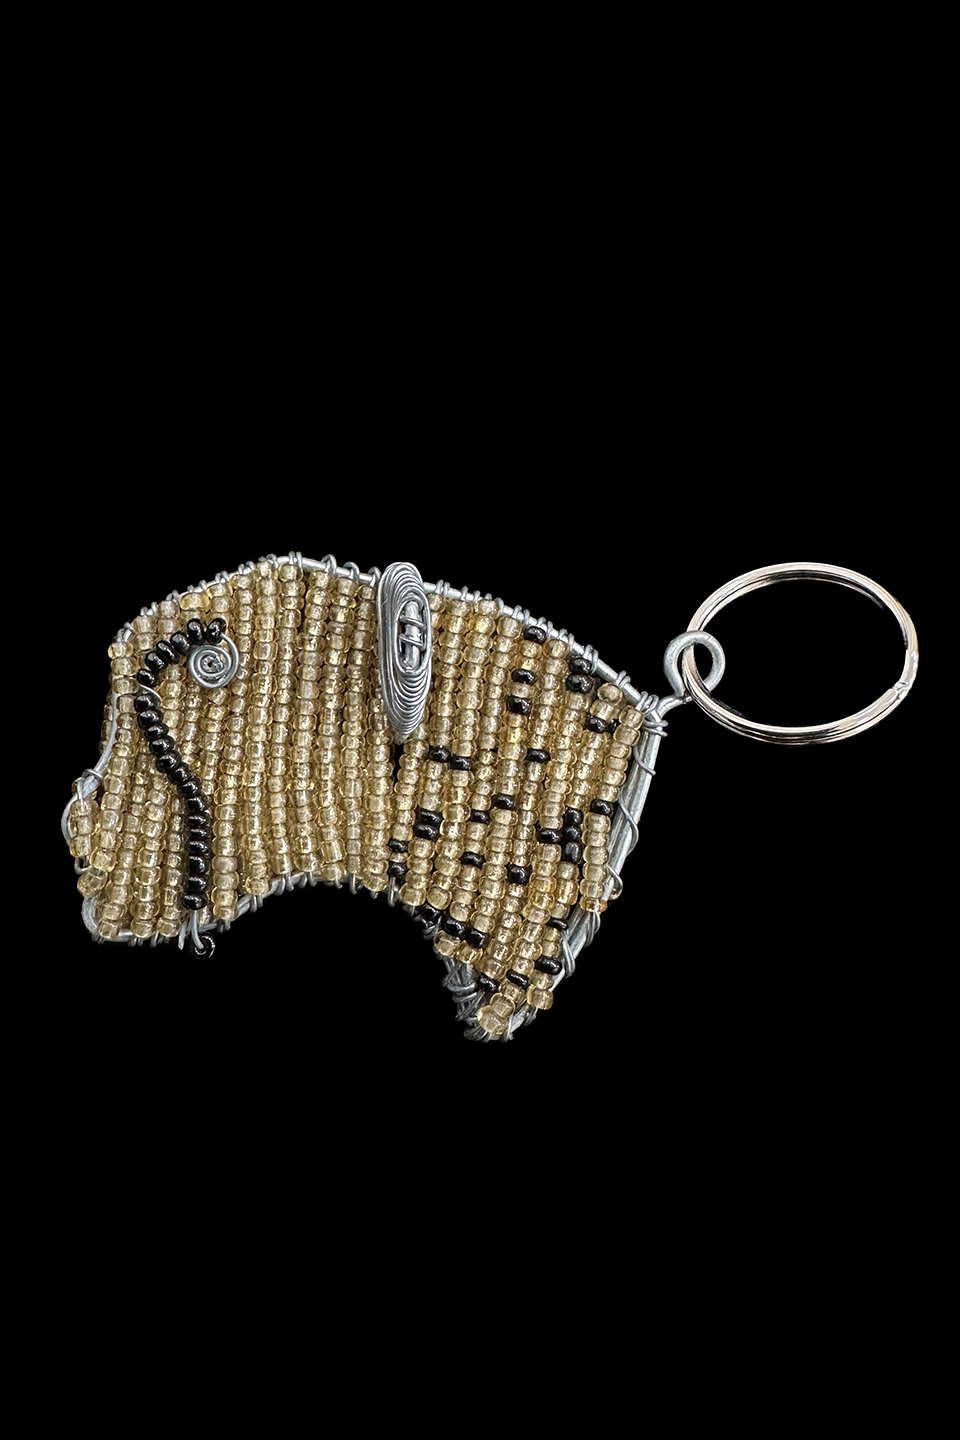 Bead and Wire Cheetah Key Ring - South Africa